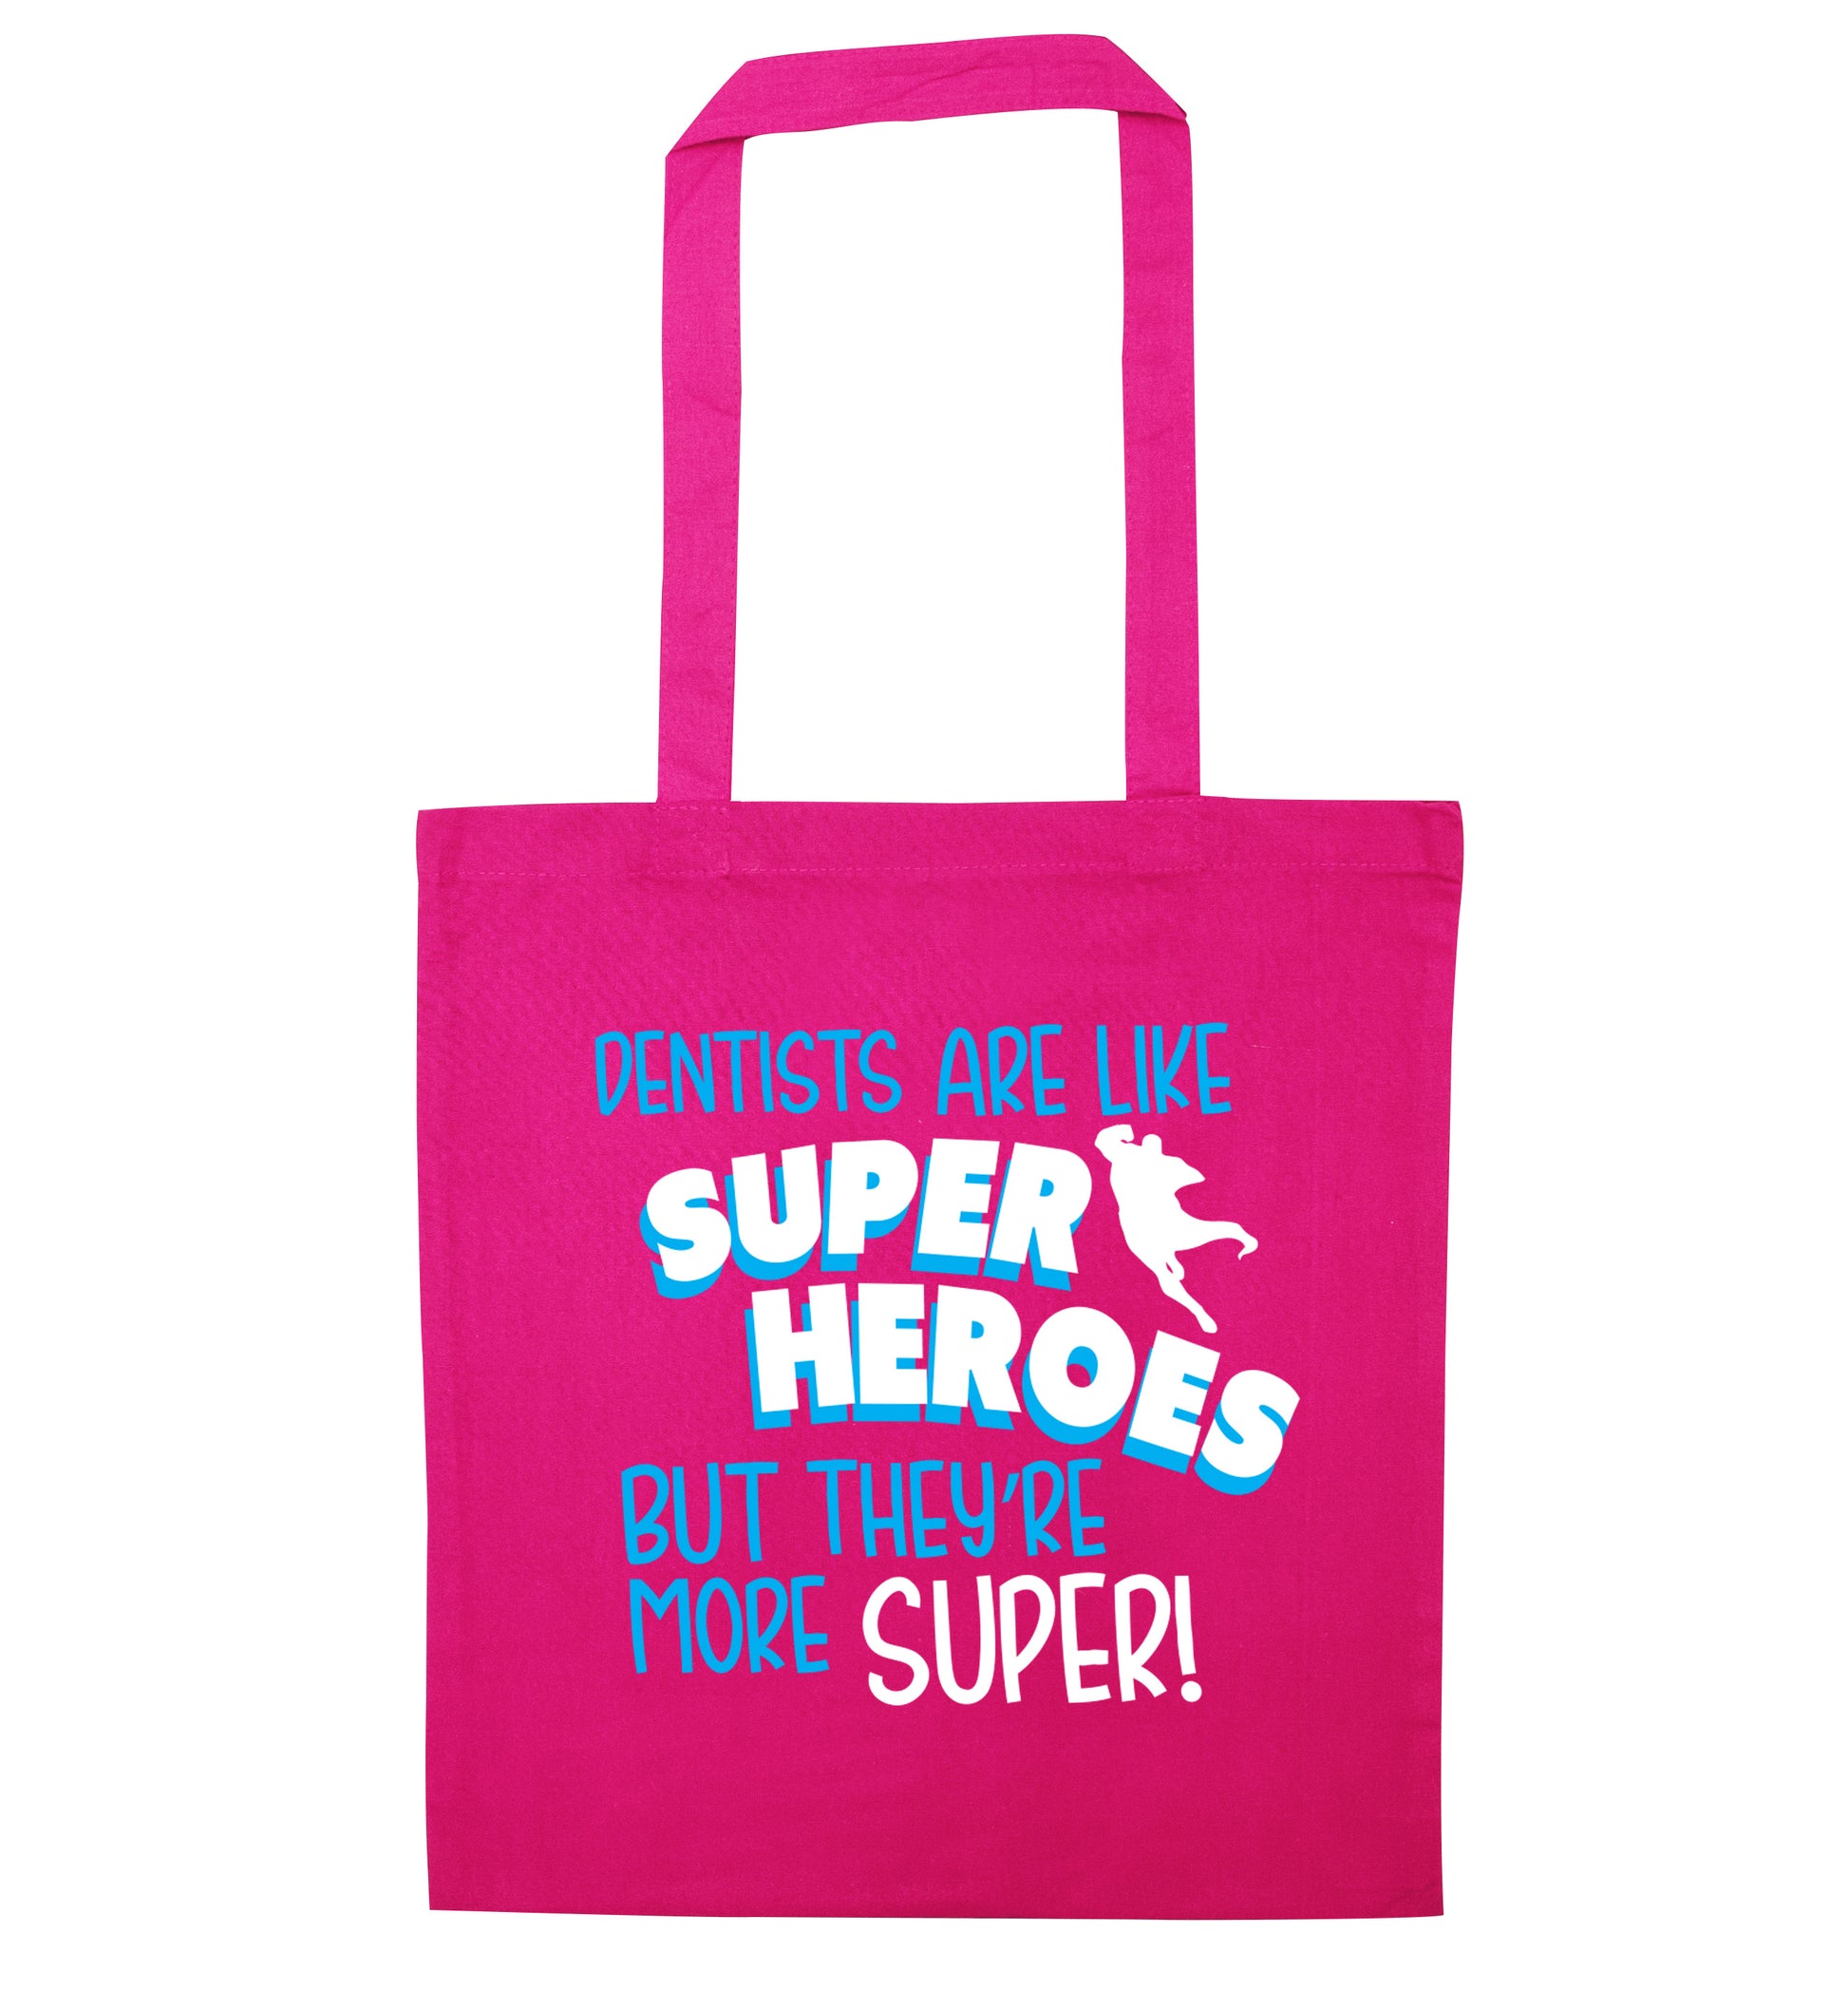 Dentists are like superheros but they're more super pink tote bag